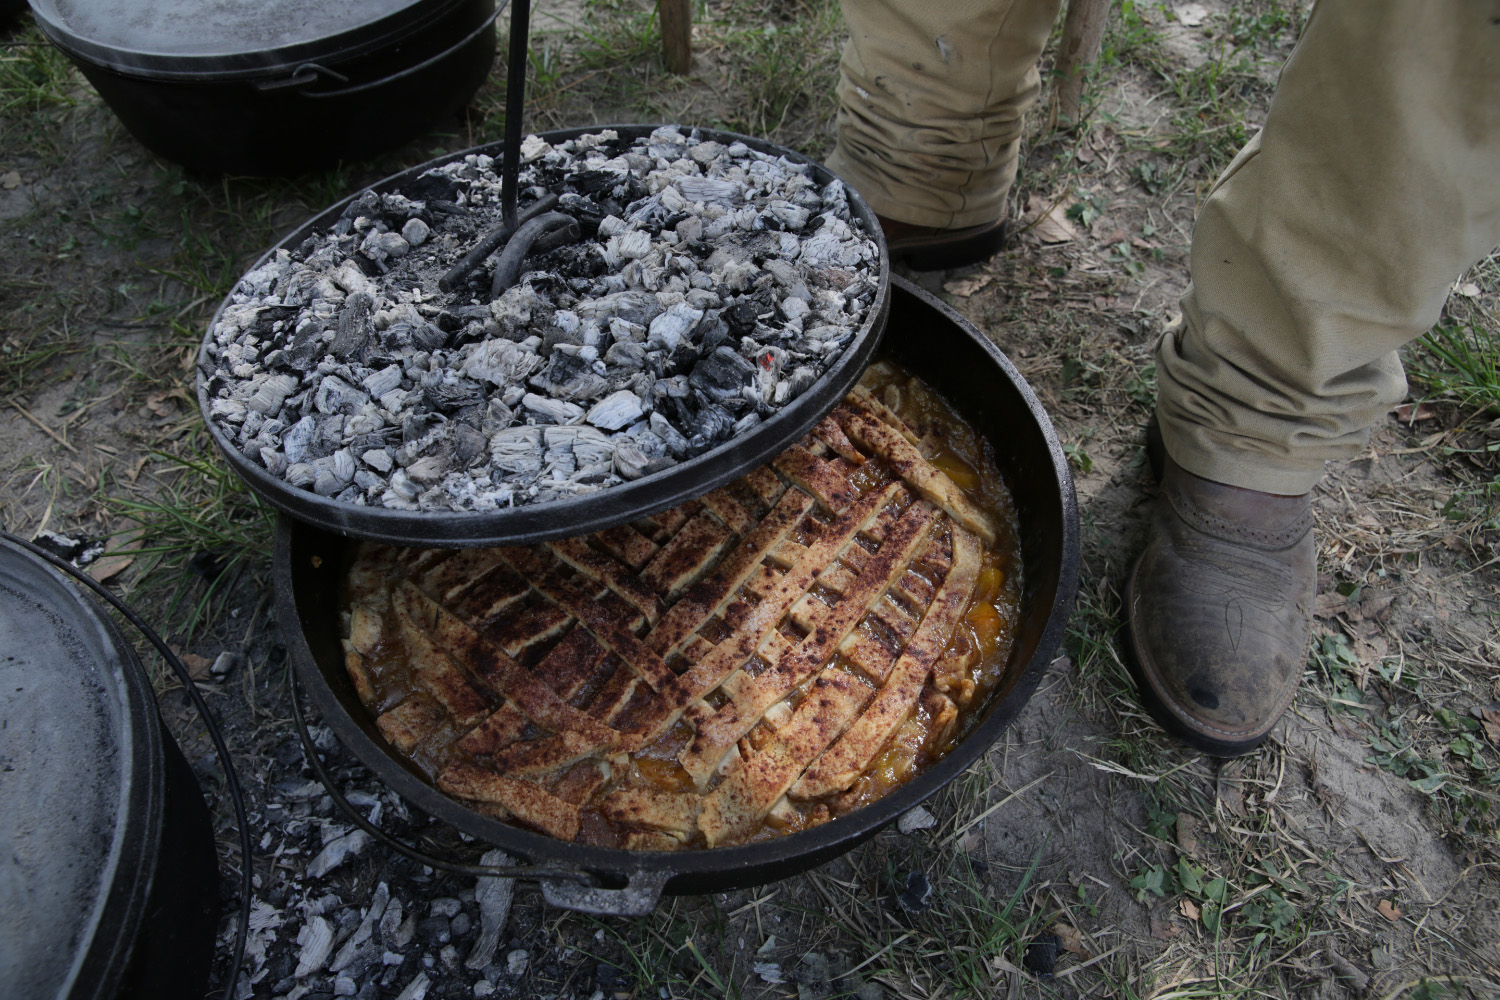 Coals on top of the lid of a dark cast iron oven containing a pie